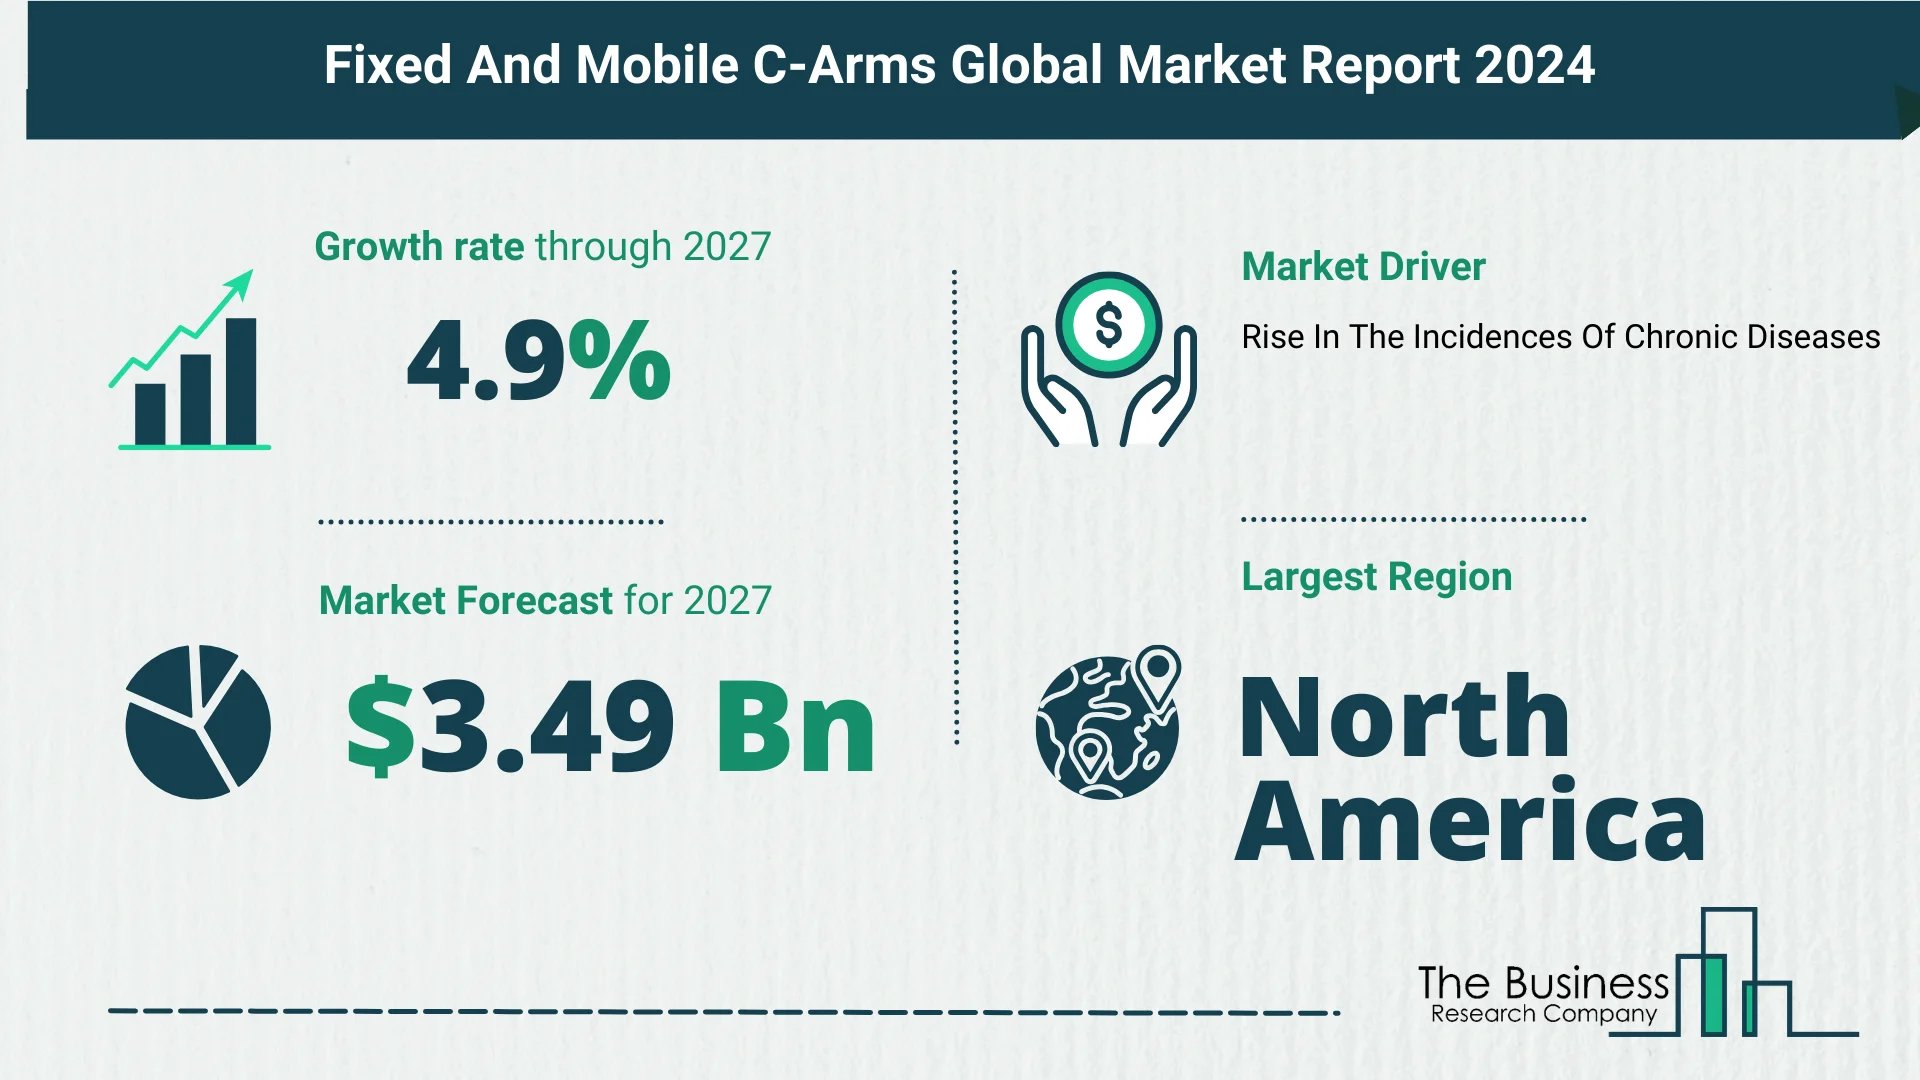 Global Fixed And Mobile C-Arms Market Report 2023 – Top Market Trends And Opportunities